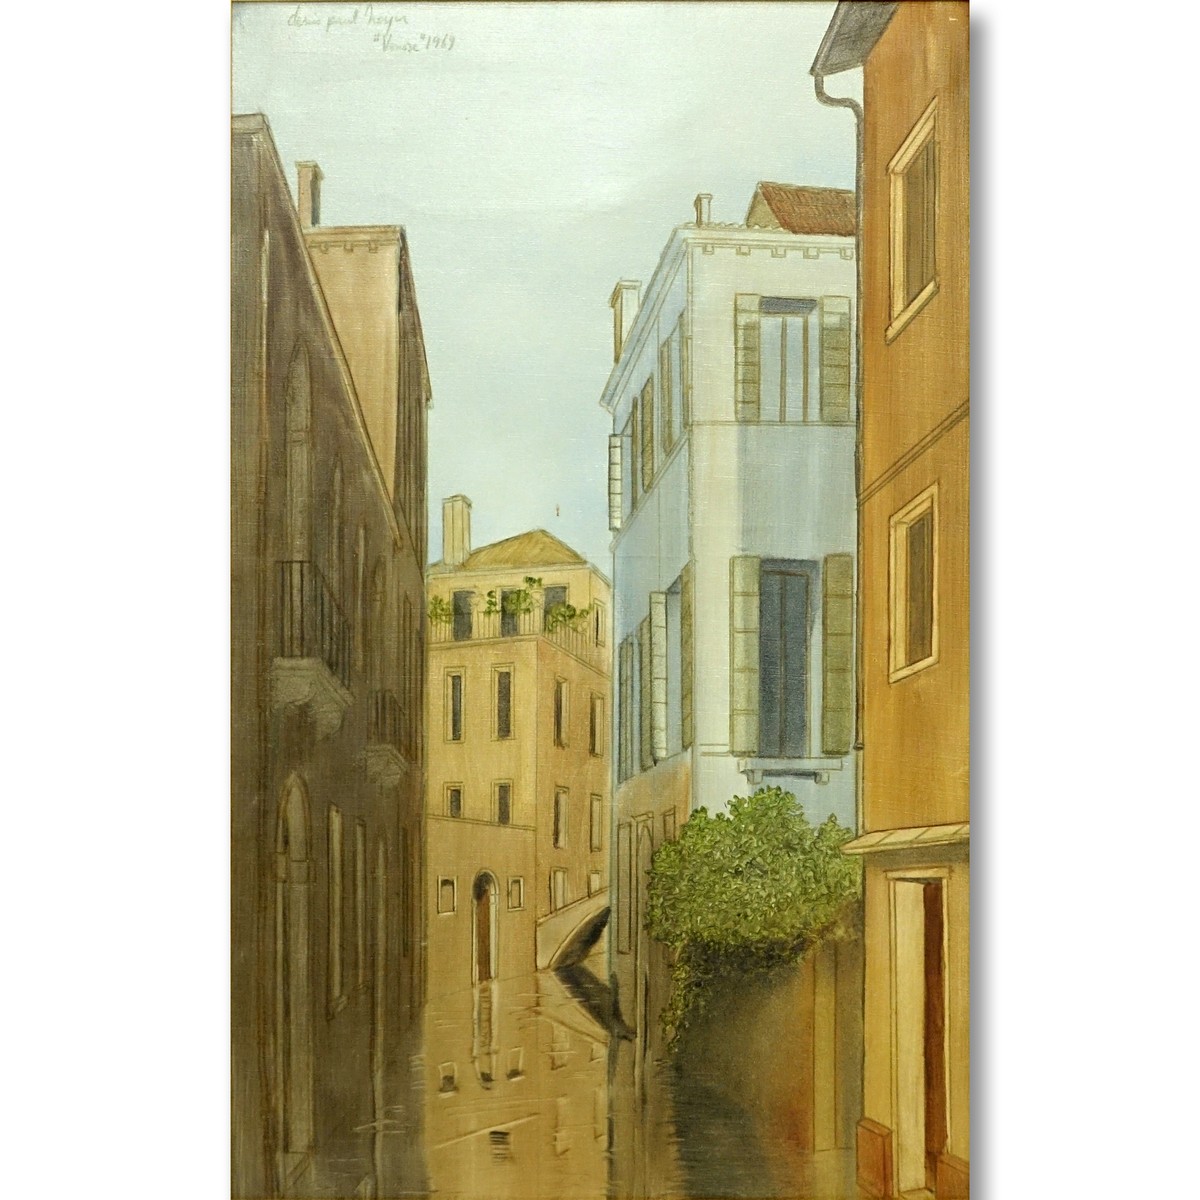 Denis Paul Noyer, French (born 1940) Oil on canvas "Venice". Inscribed, signed upper left, dated '69.